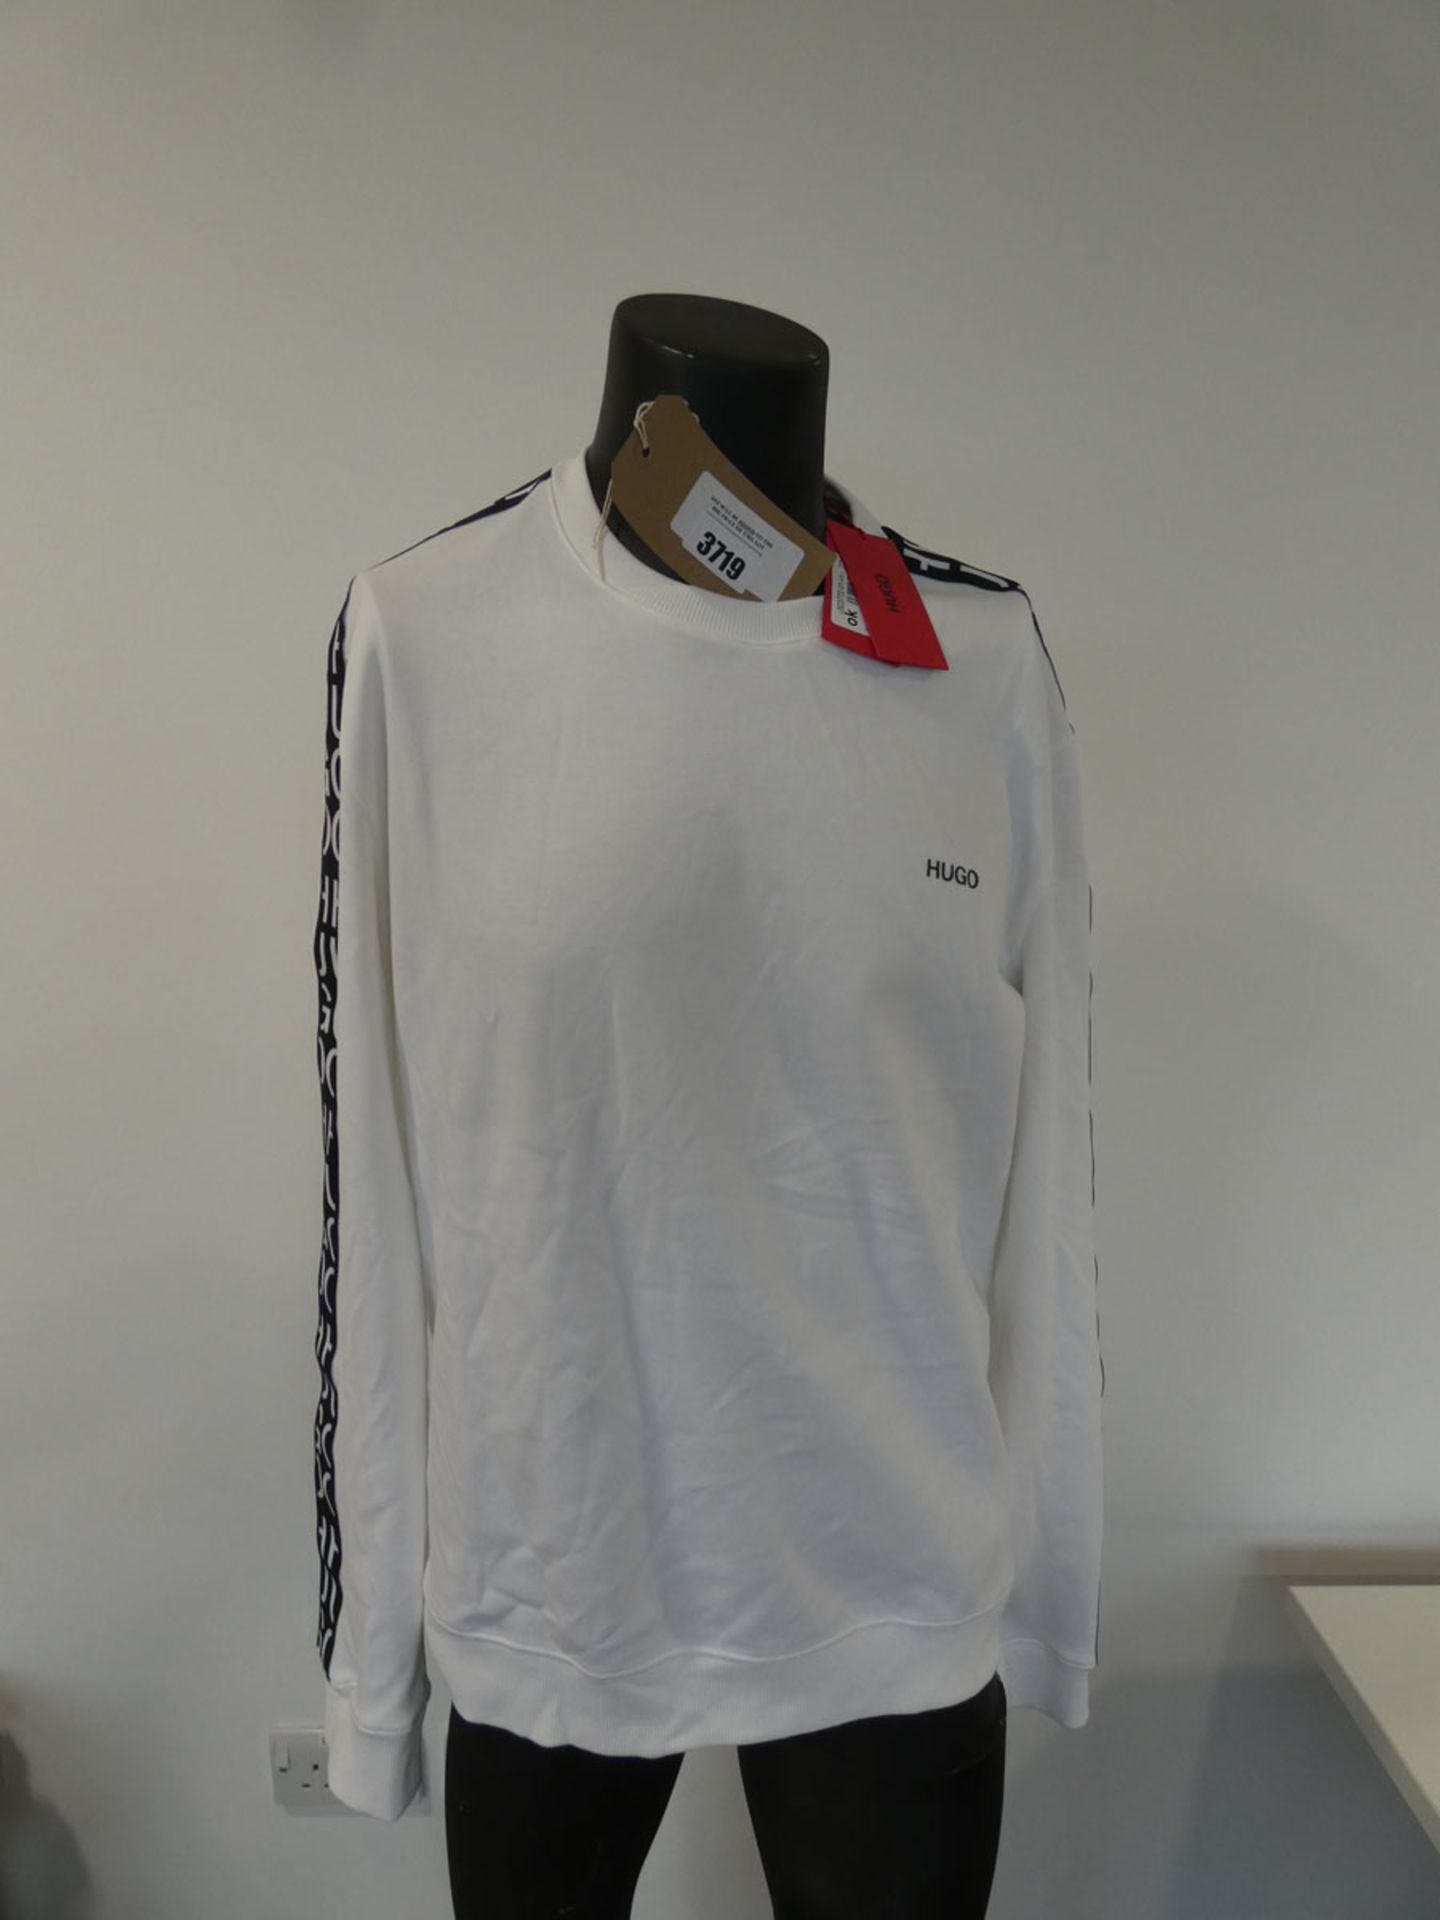 Hugo Boss men's doby tape sweat in white size XLarge (Mannequin not included)